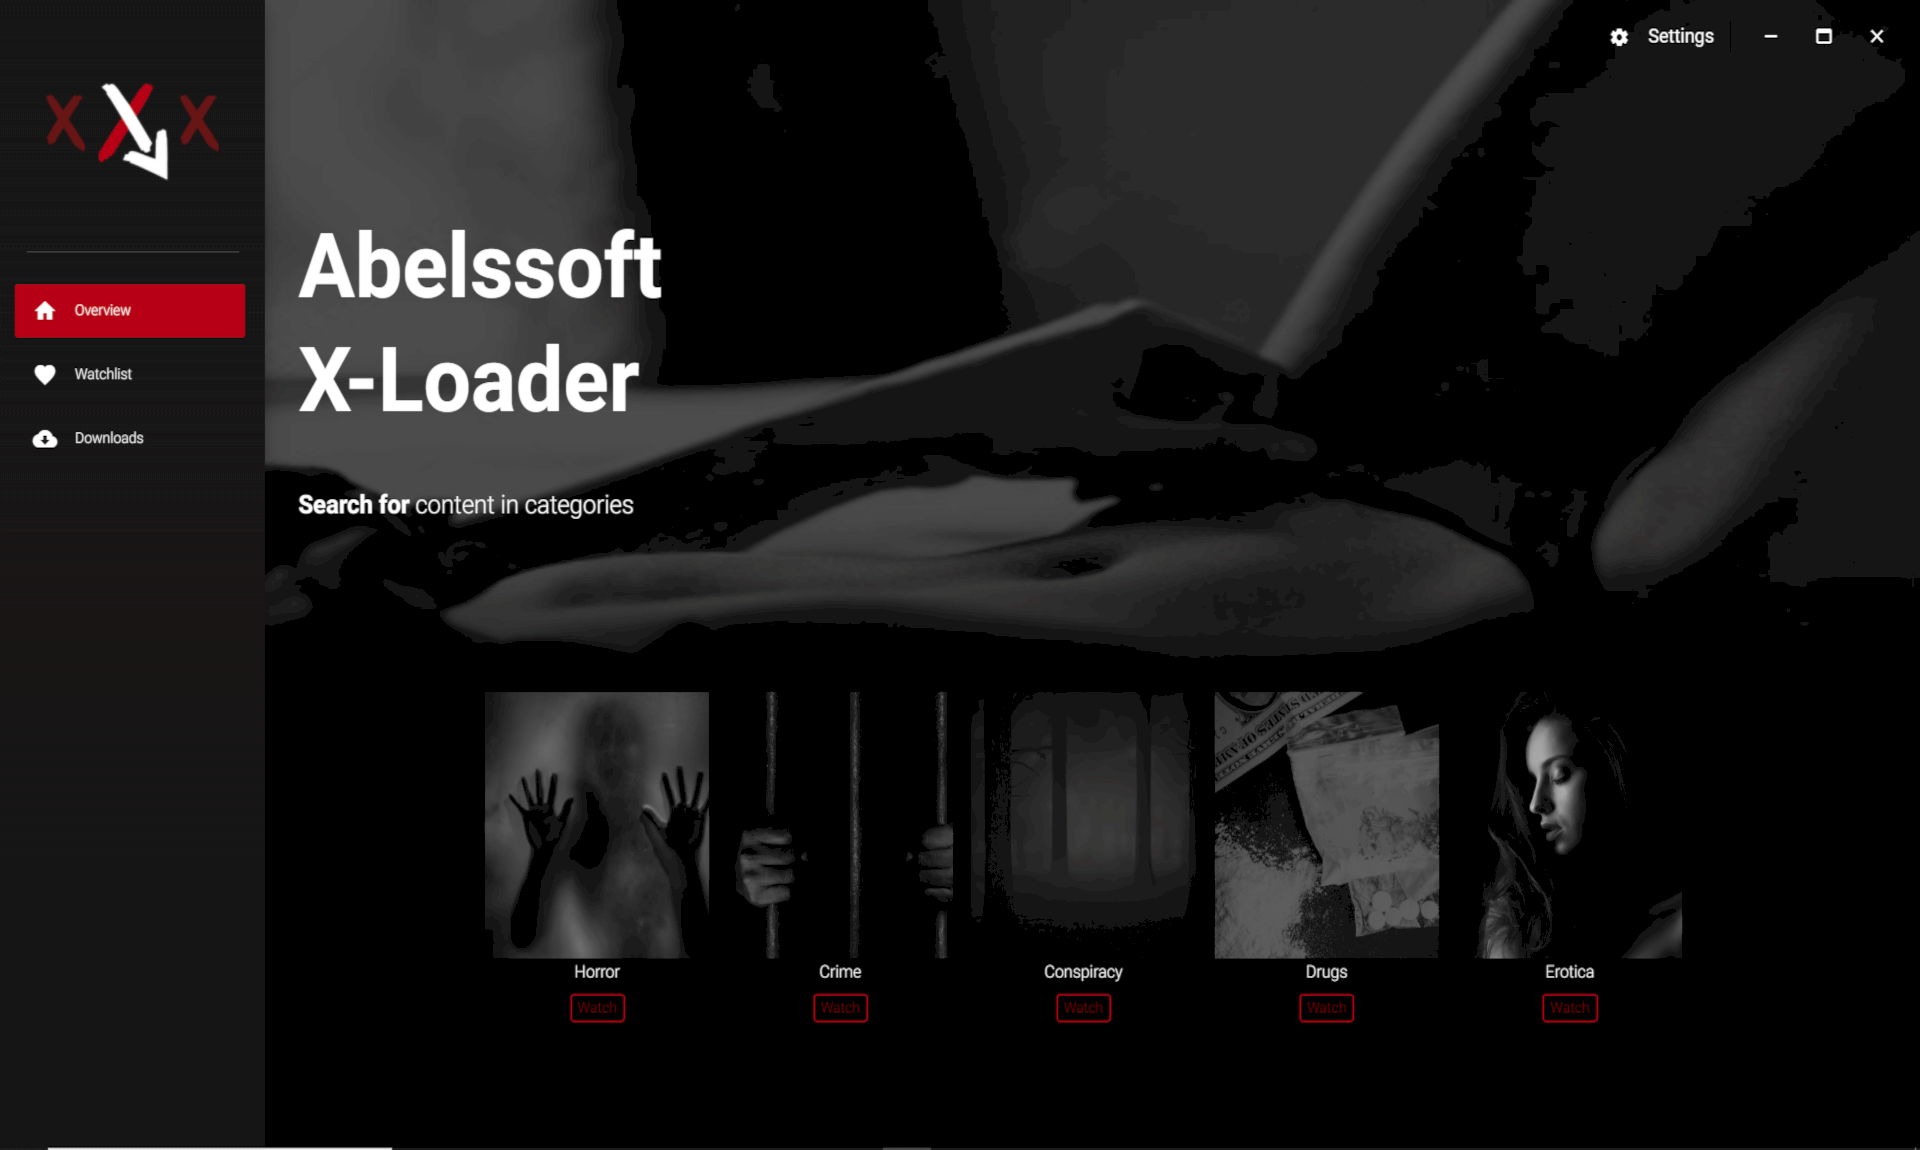 The Abelssoft X-Loader offers you the best of the categories horror, drugs, conspiracy, crime and erotica.